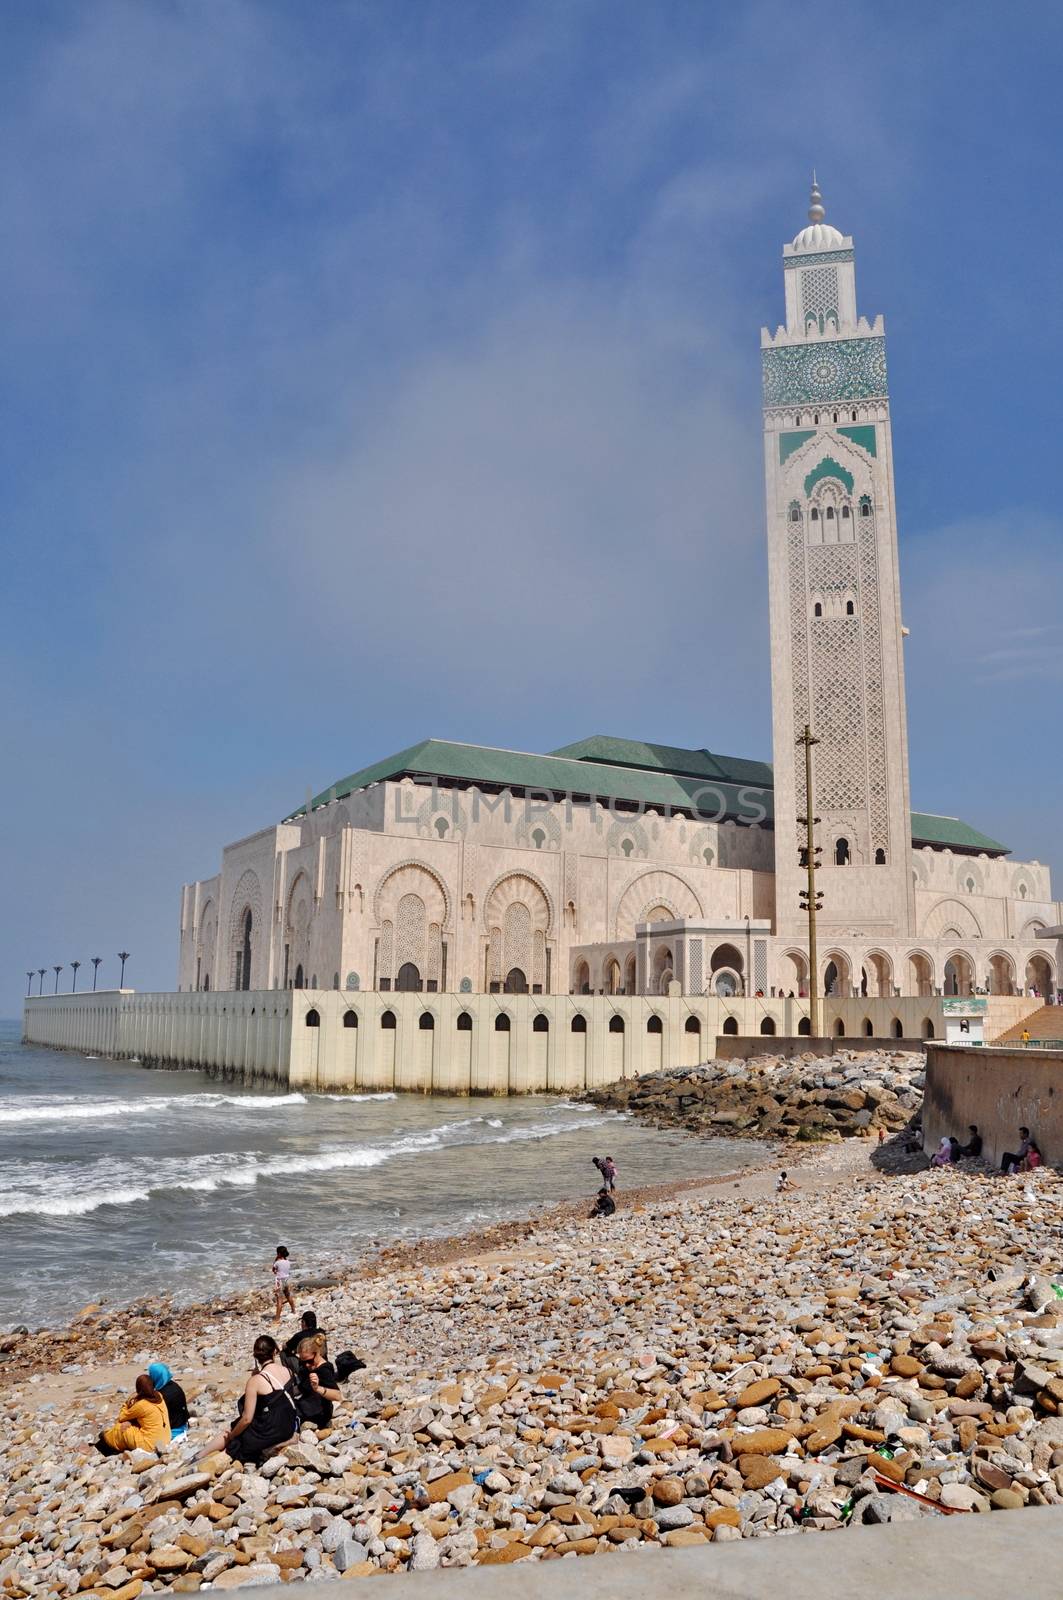 The Hassan II Mosque, located in Casablanca is the largest mosque in Morocco and the third largest mosque in the world